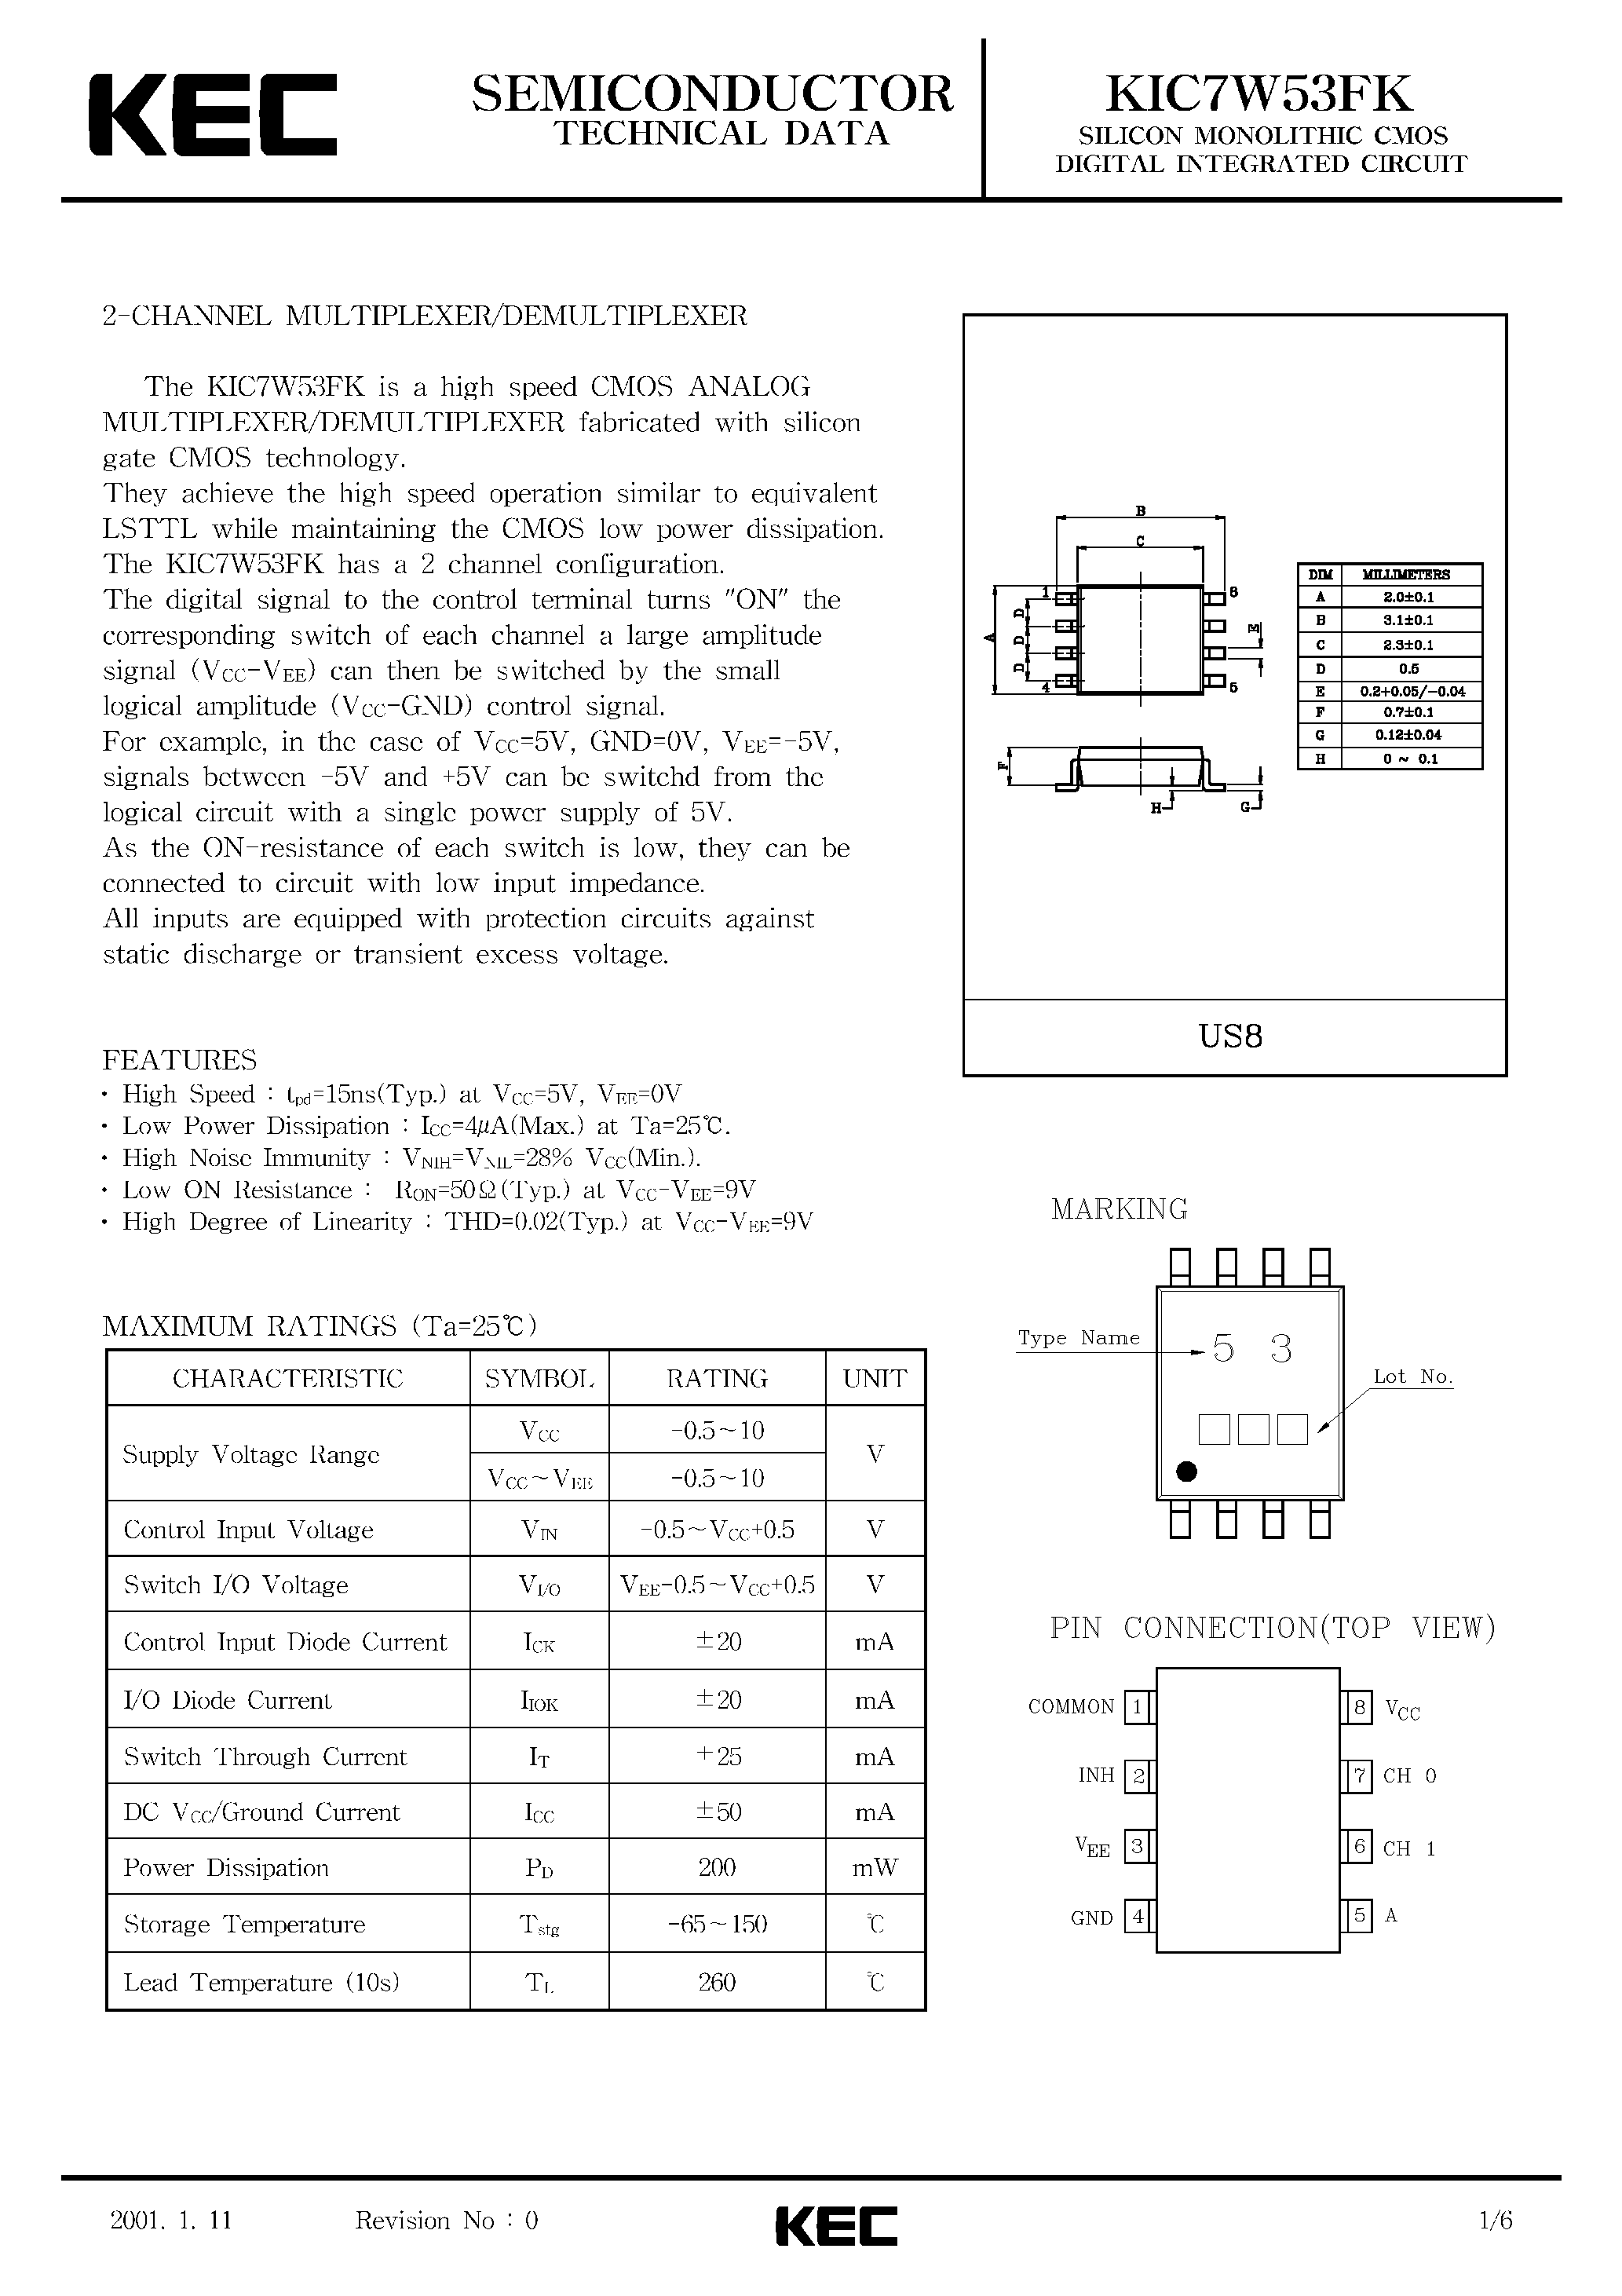 Datasheet KIC7W53FK - SILICON MONOLITHIC CMOS DIGITAL INTEGRATED CIRCUIT(2-CHANNEL MULTIPLEXER/DEMULTIPLEXER) page 1